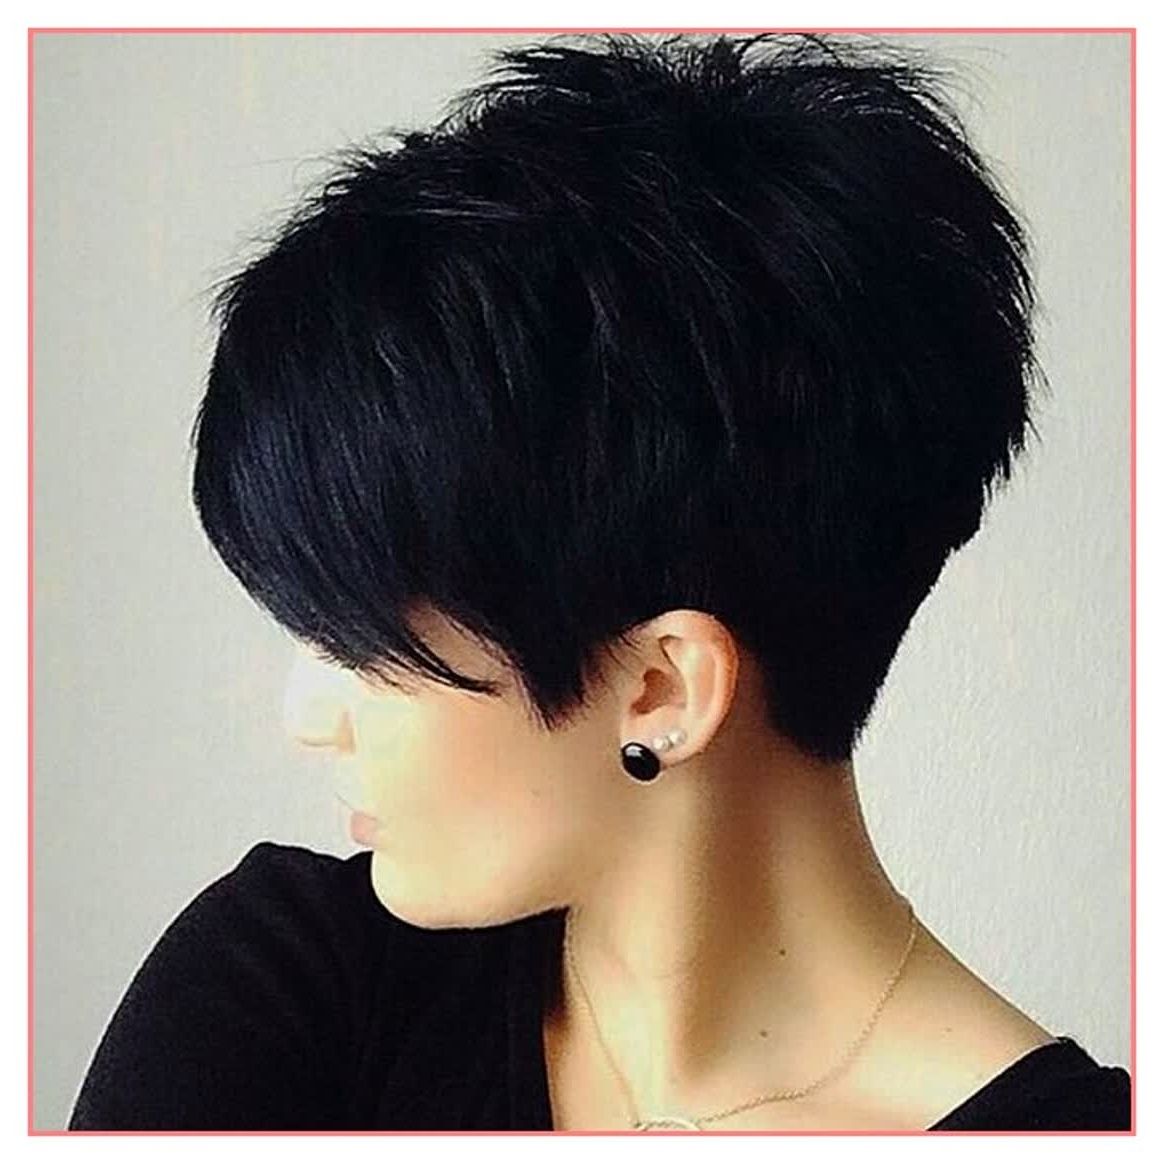 Trending Hairstyles Women8217s Long Pixie Hairstyles – Best Throughout Most Up To Date Long Pixie Hairstyles (View 15 of 15)